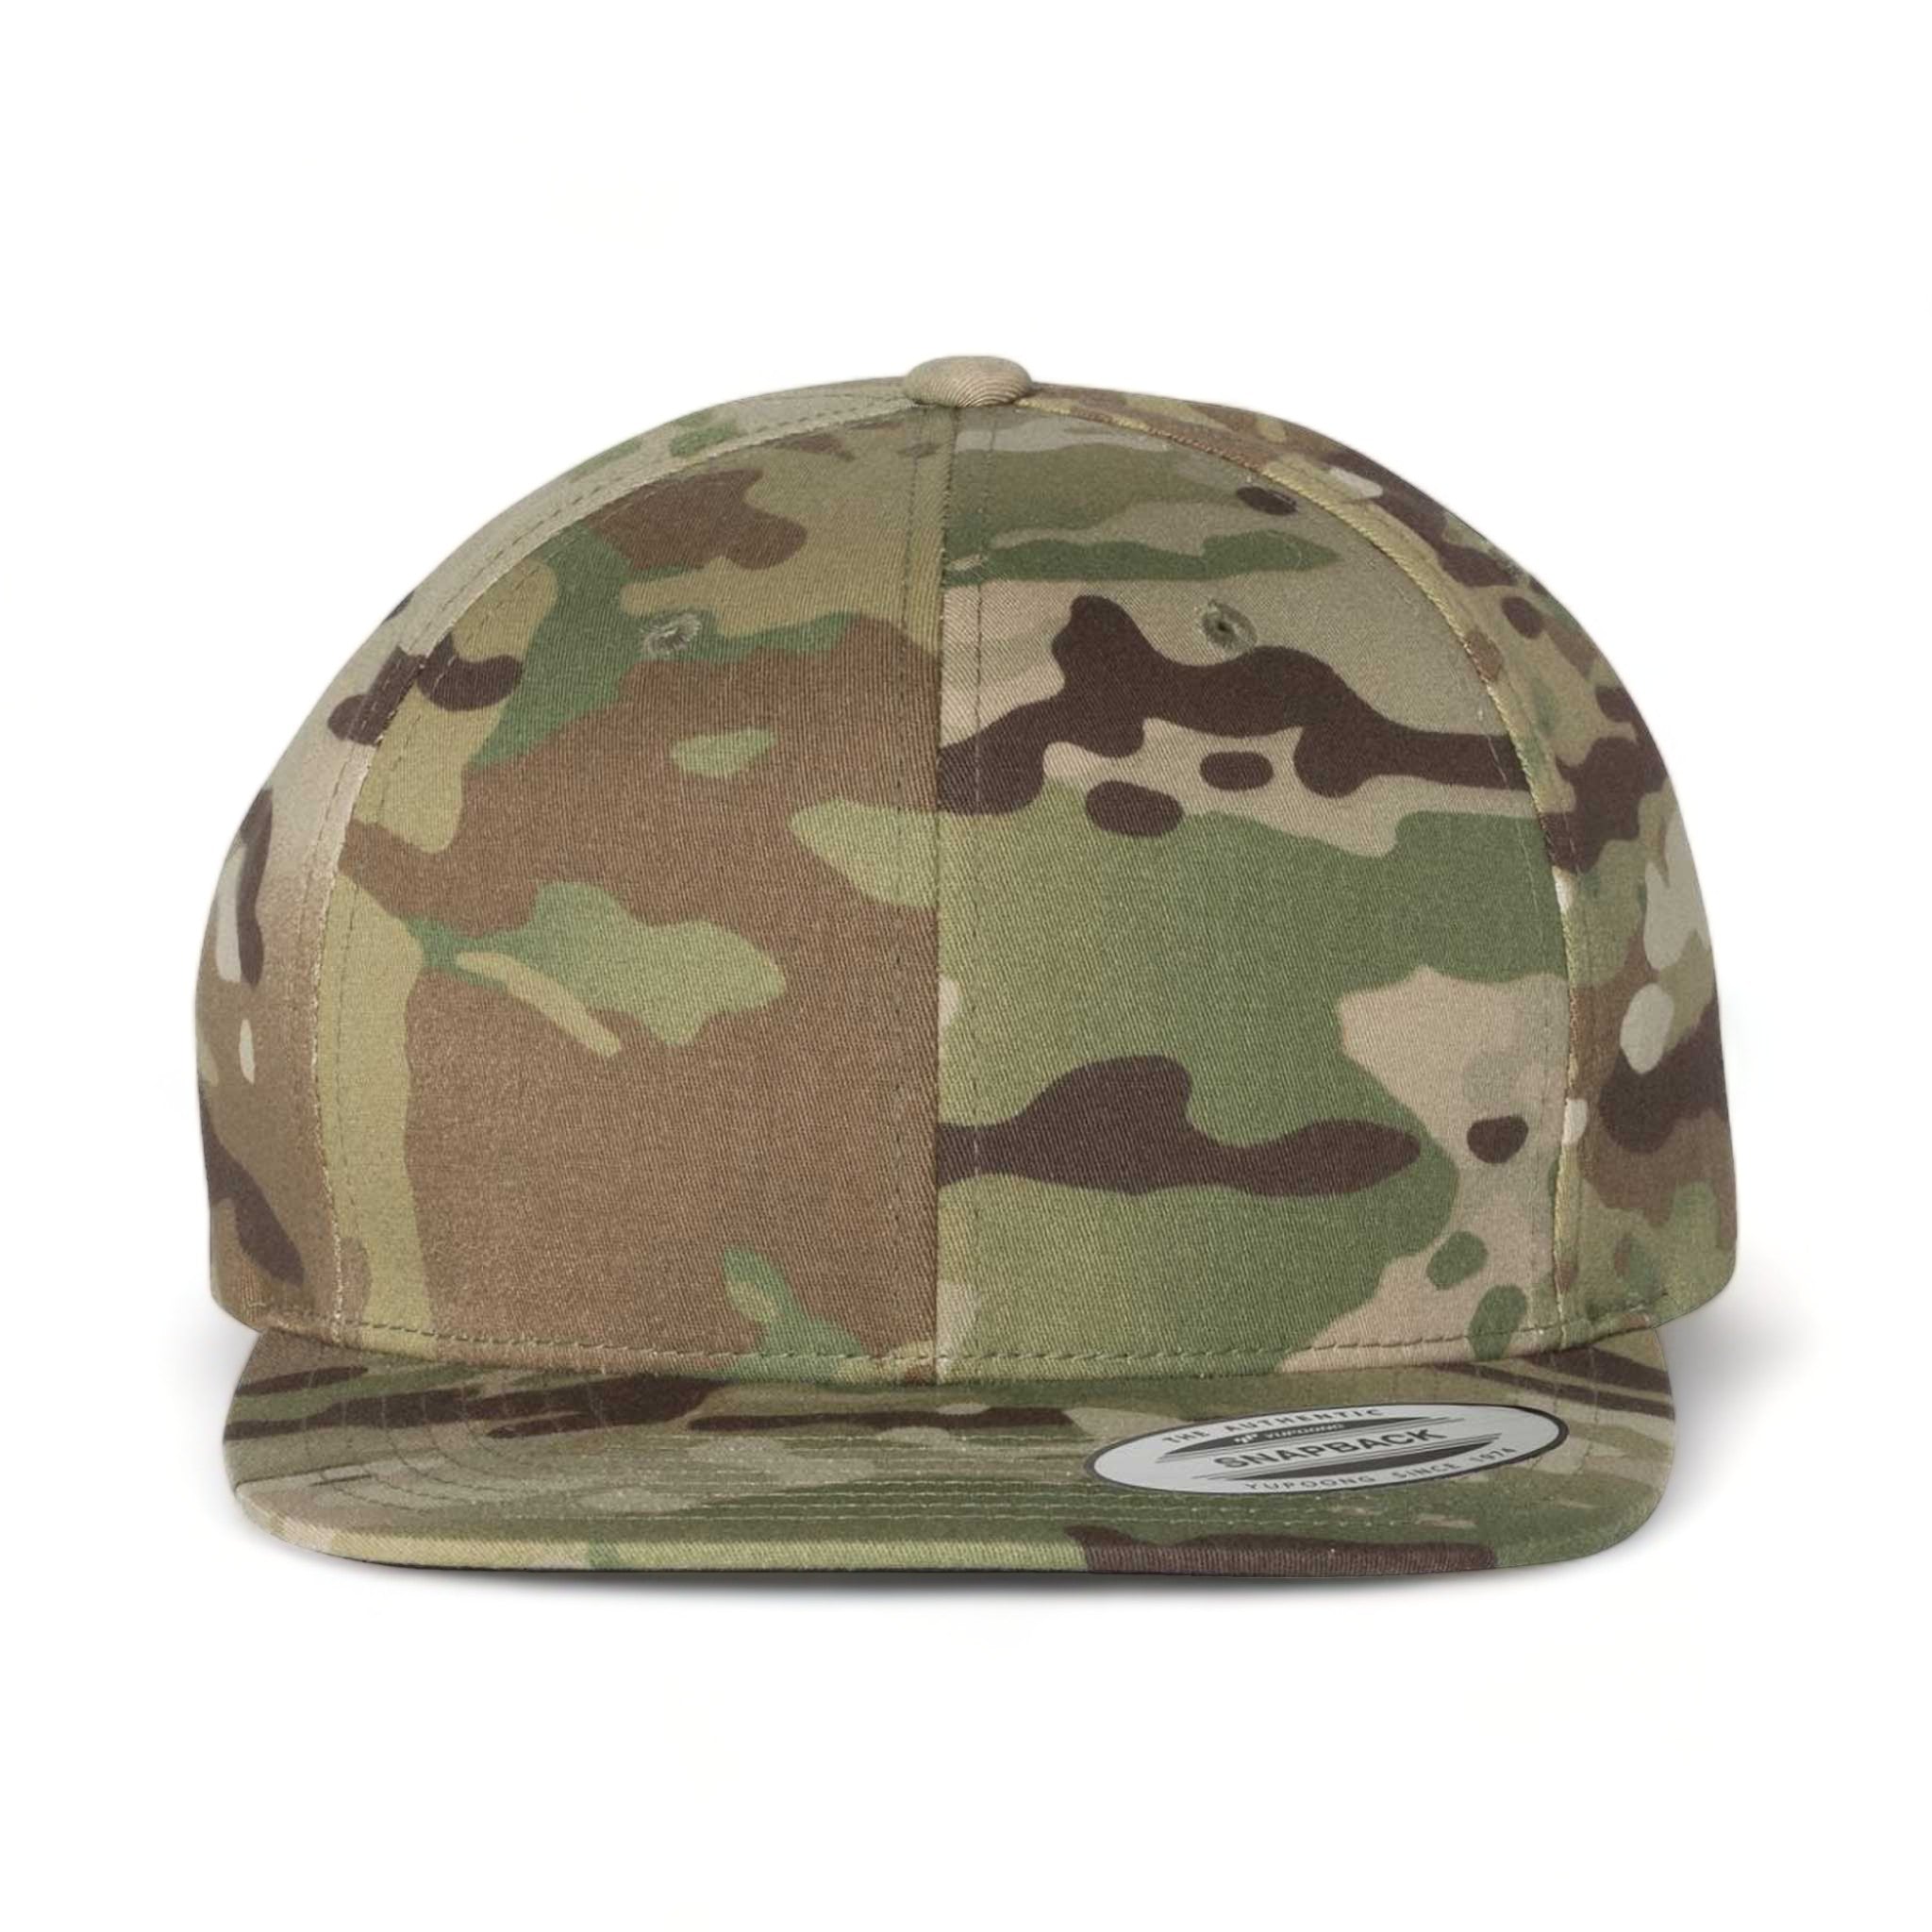 Front view of YP Classics 6089M custom hat in multicam green